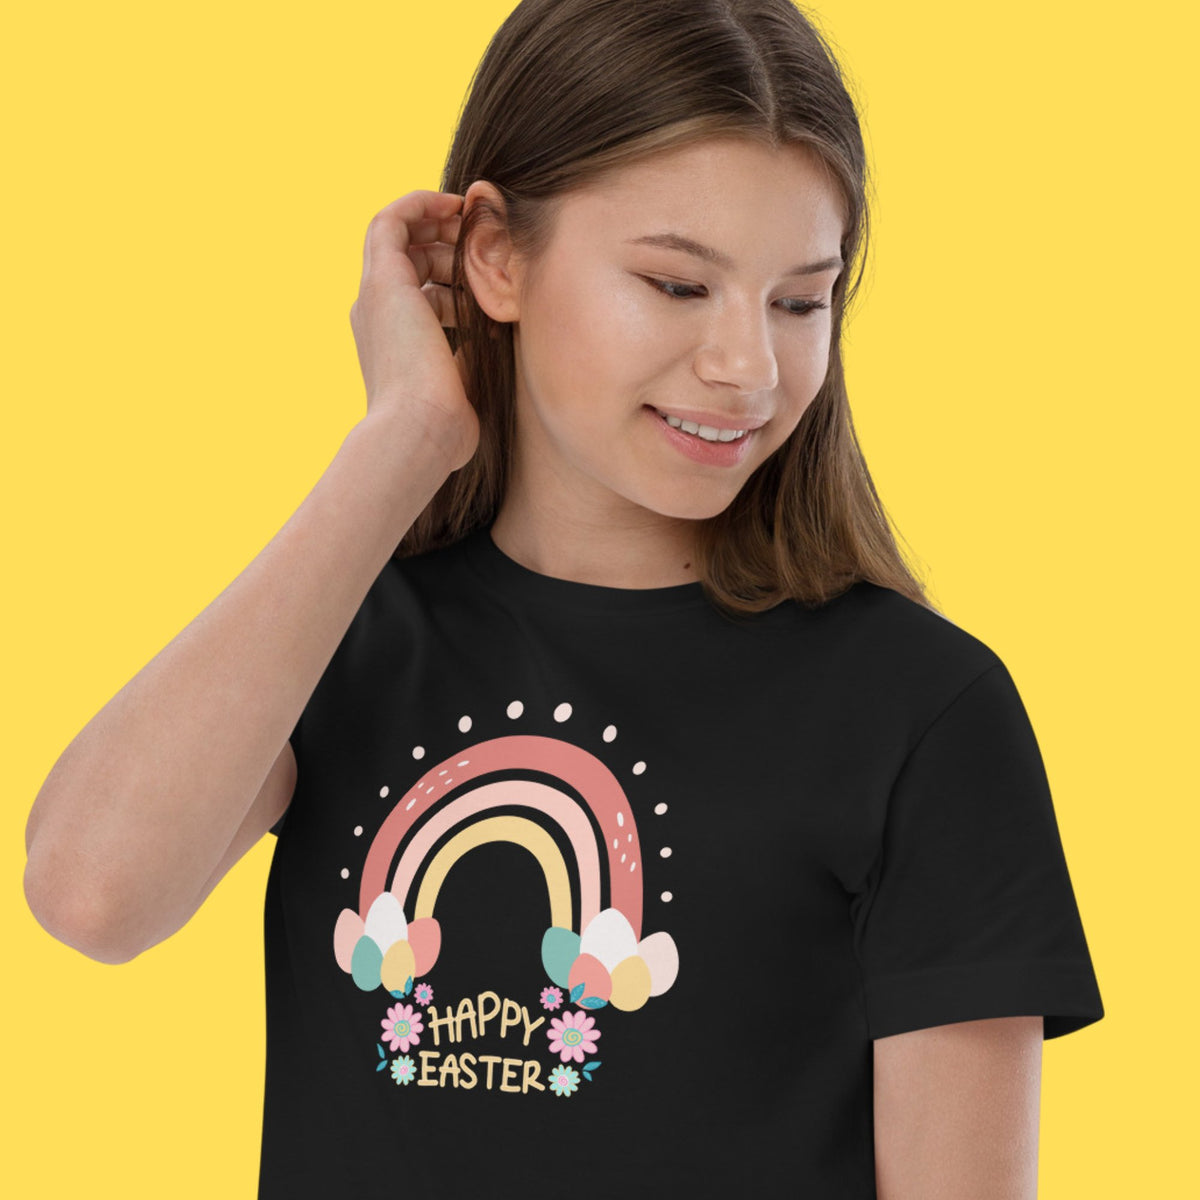 Happy Easter Youth Unisex T-shirt For Easter - Eventwisecreations